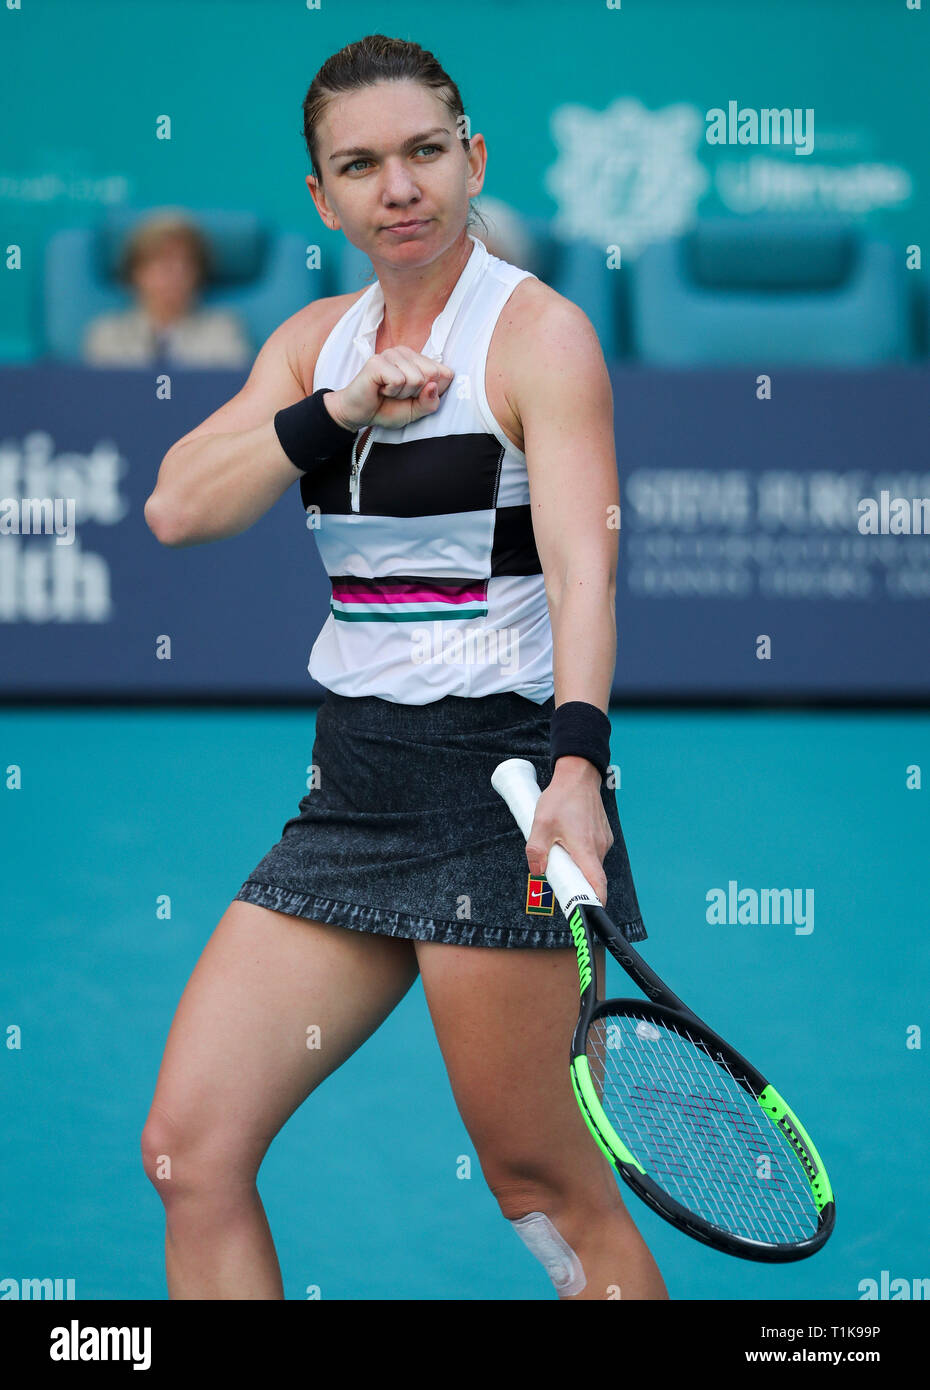 Miami Gardens, Florida, USA. 27th Mar, 2019. Simona Halep, of Romania, celebrates her victory over Qiang Wang, of China, of a quarter-finals match at the 2019 Miami Open Presented by Itau professional tennis tournament, played at the Hardrock Stadium in Miami Gardens, Florida, USA. Halep won 6-4, 7-5. Mario Houben/CSM/Alamy Live News Stock Photo